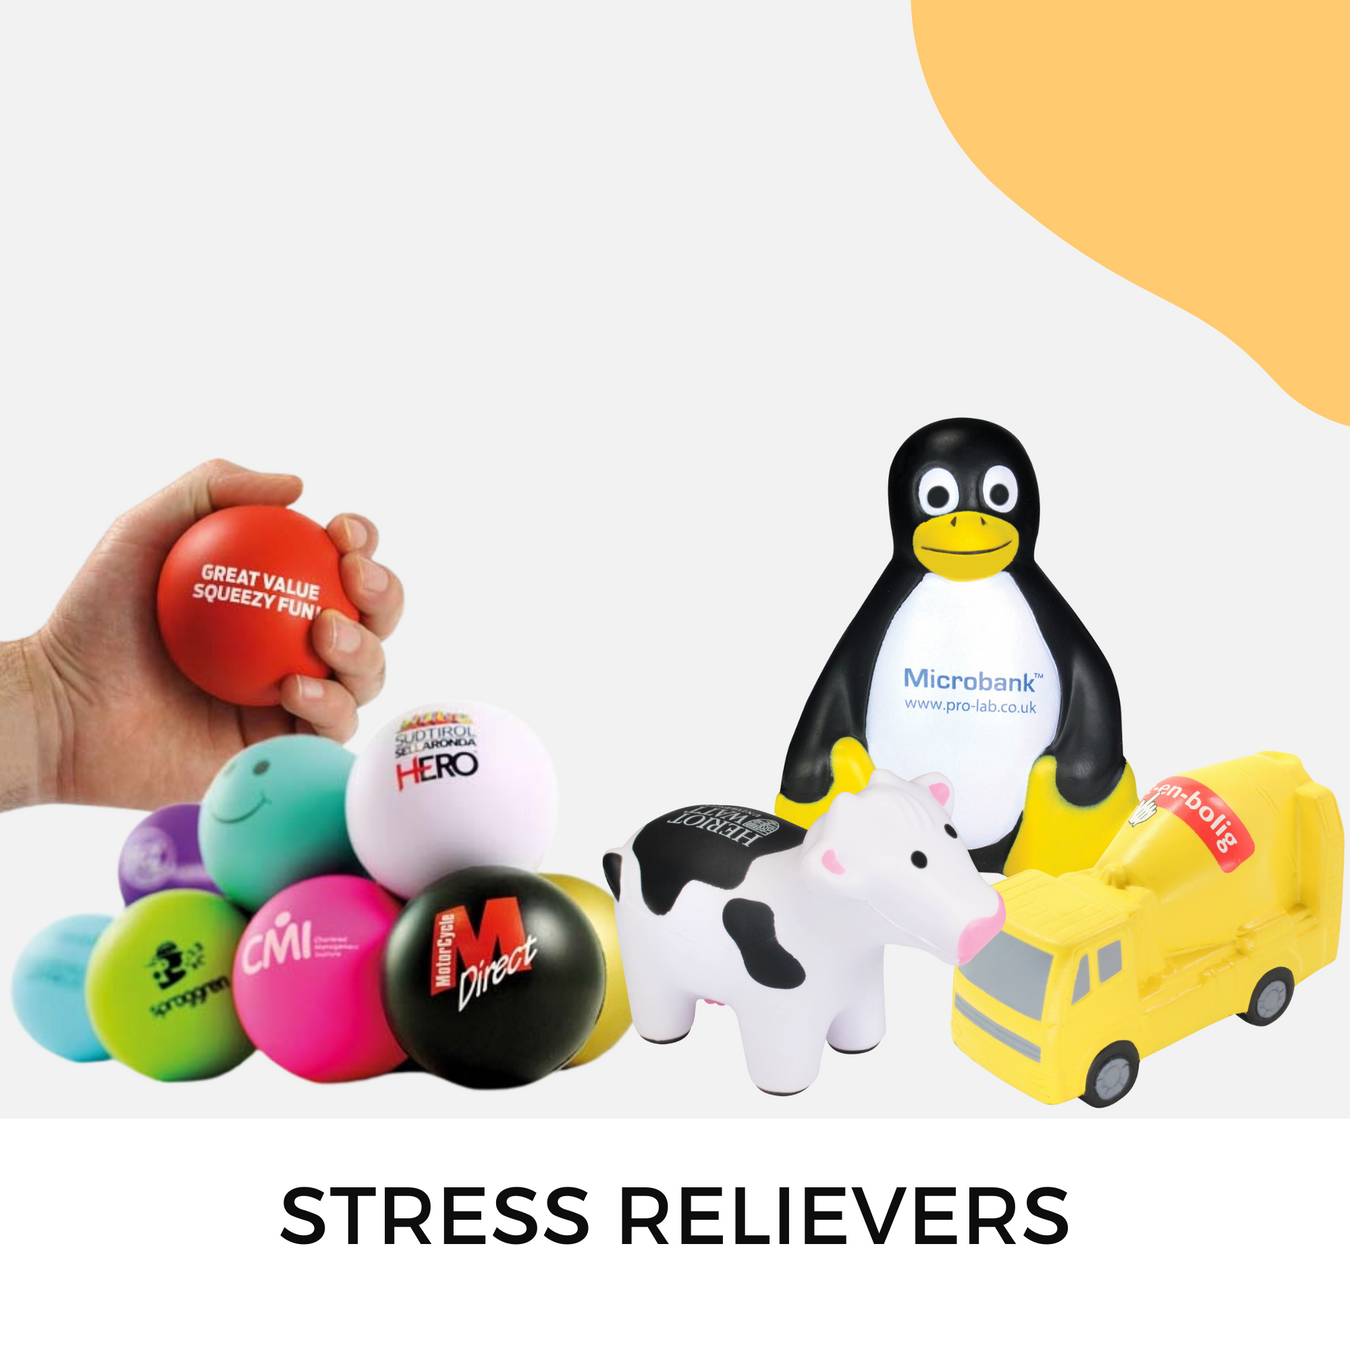 Logo printed stress ball relievers